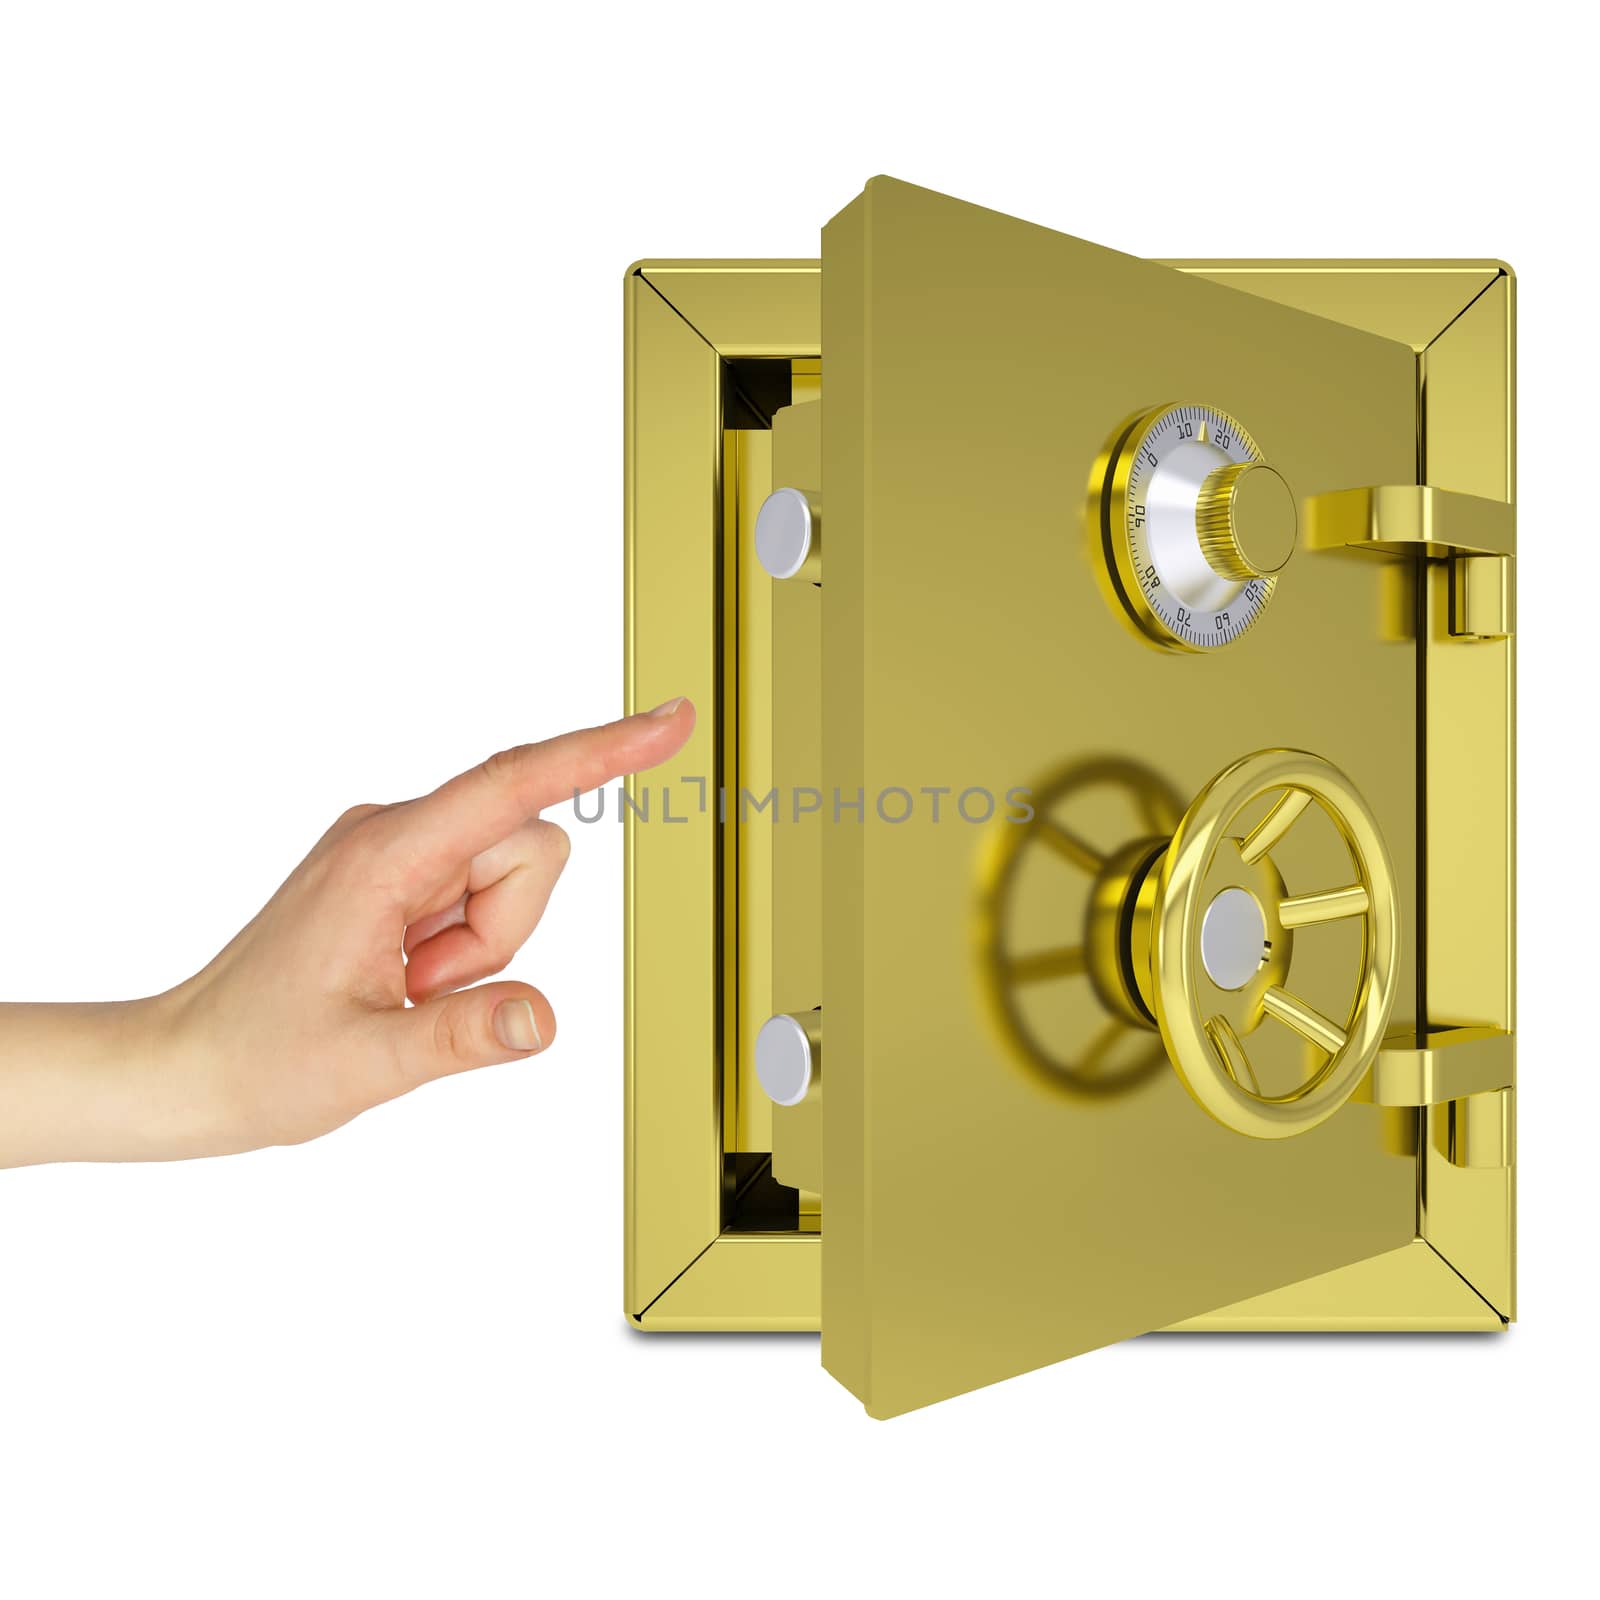 Hand pointing to the open gold safe by cherezoff